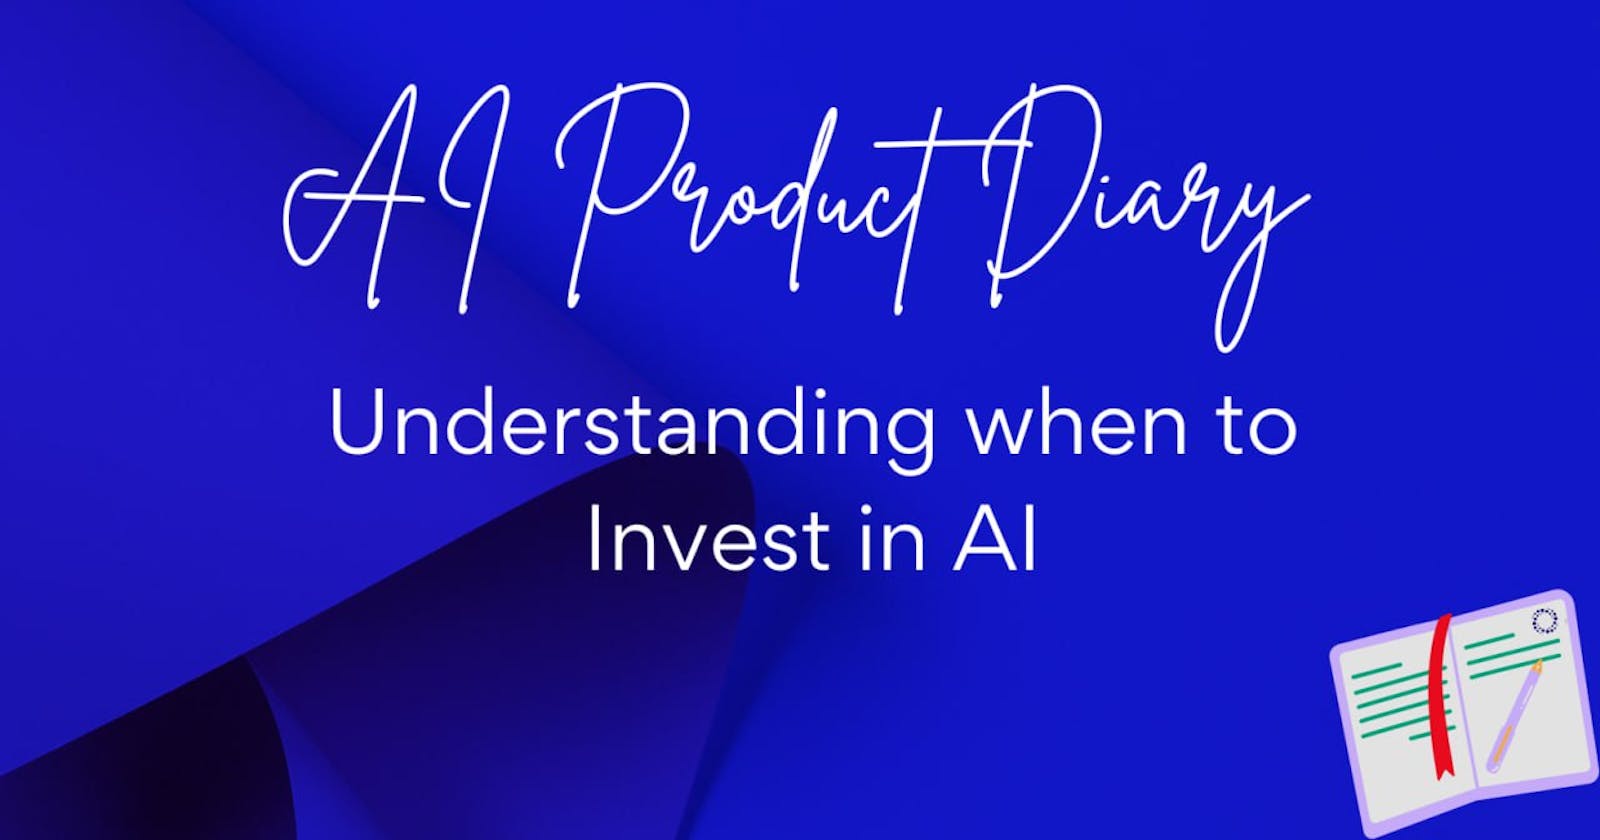 Not all problems require AI solutions: Understanding when to invest in AI